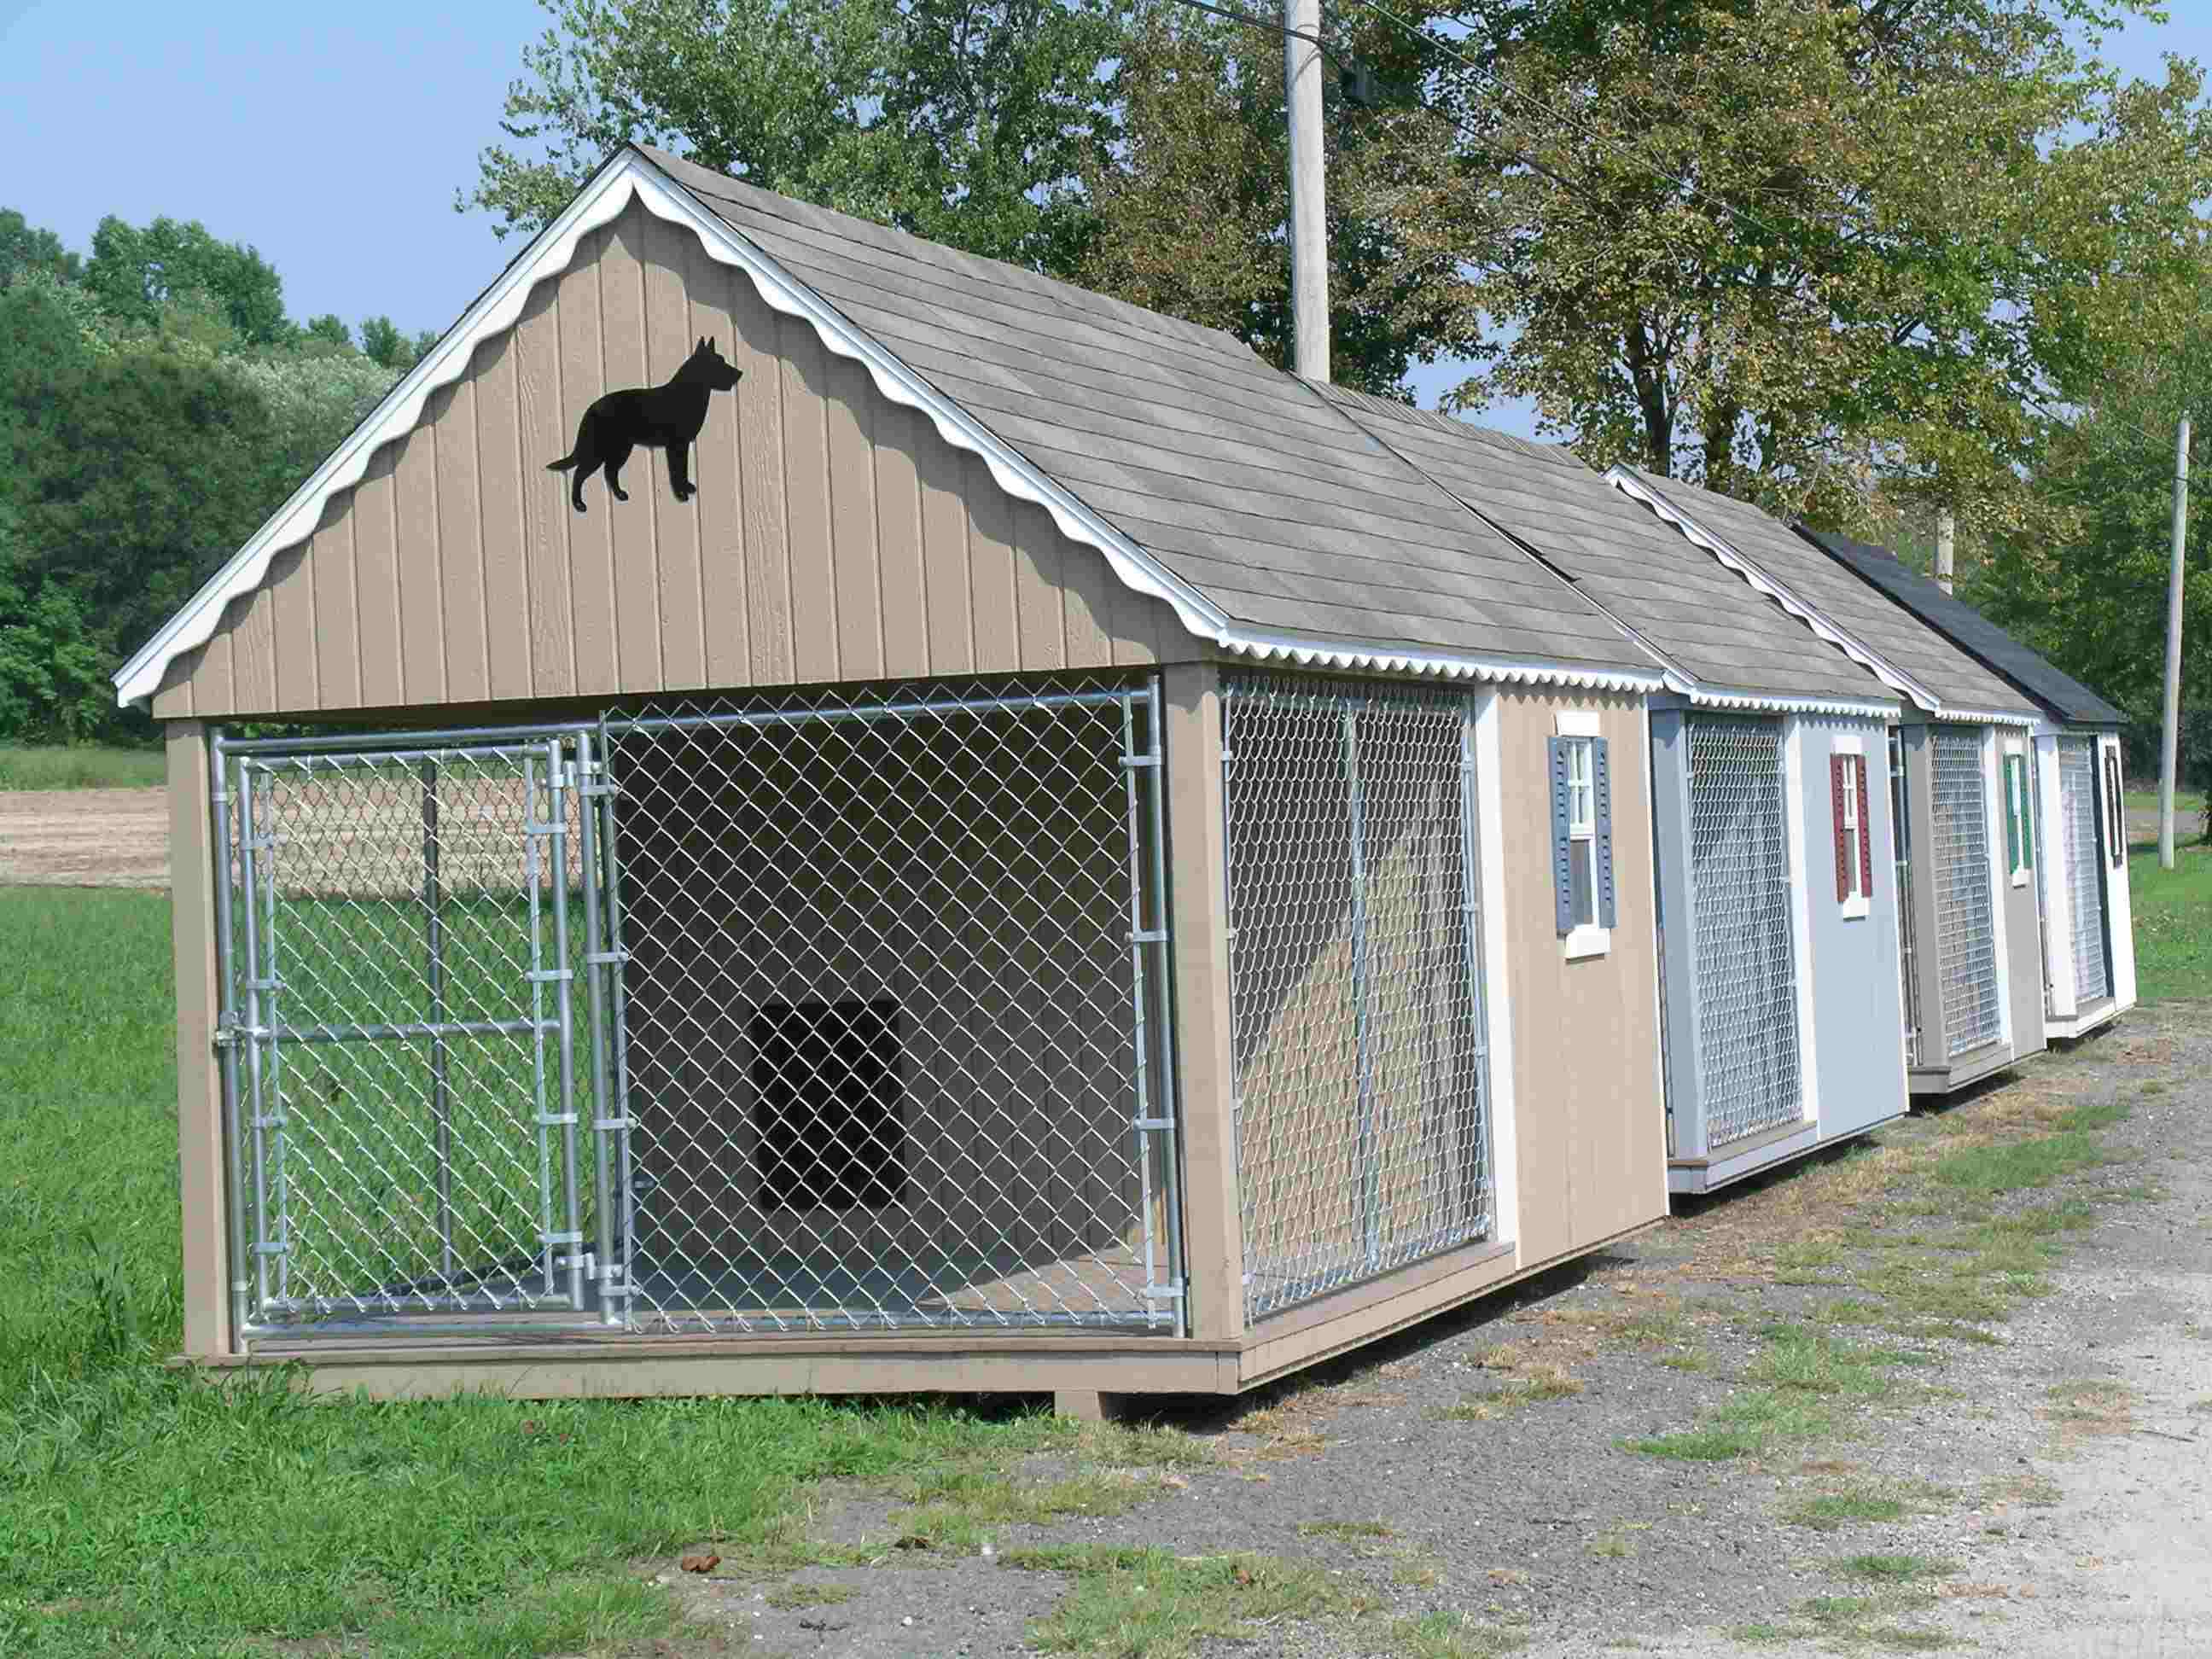 4 Canine Cabins in a row.